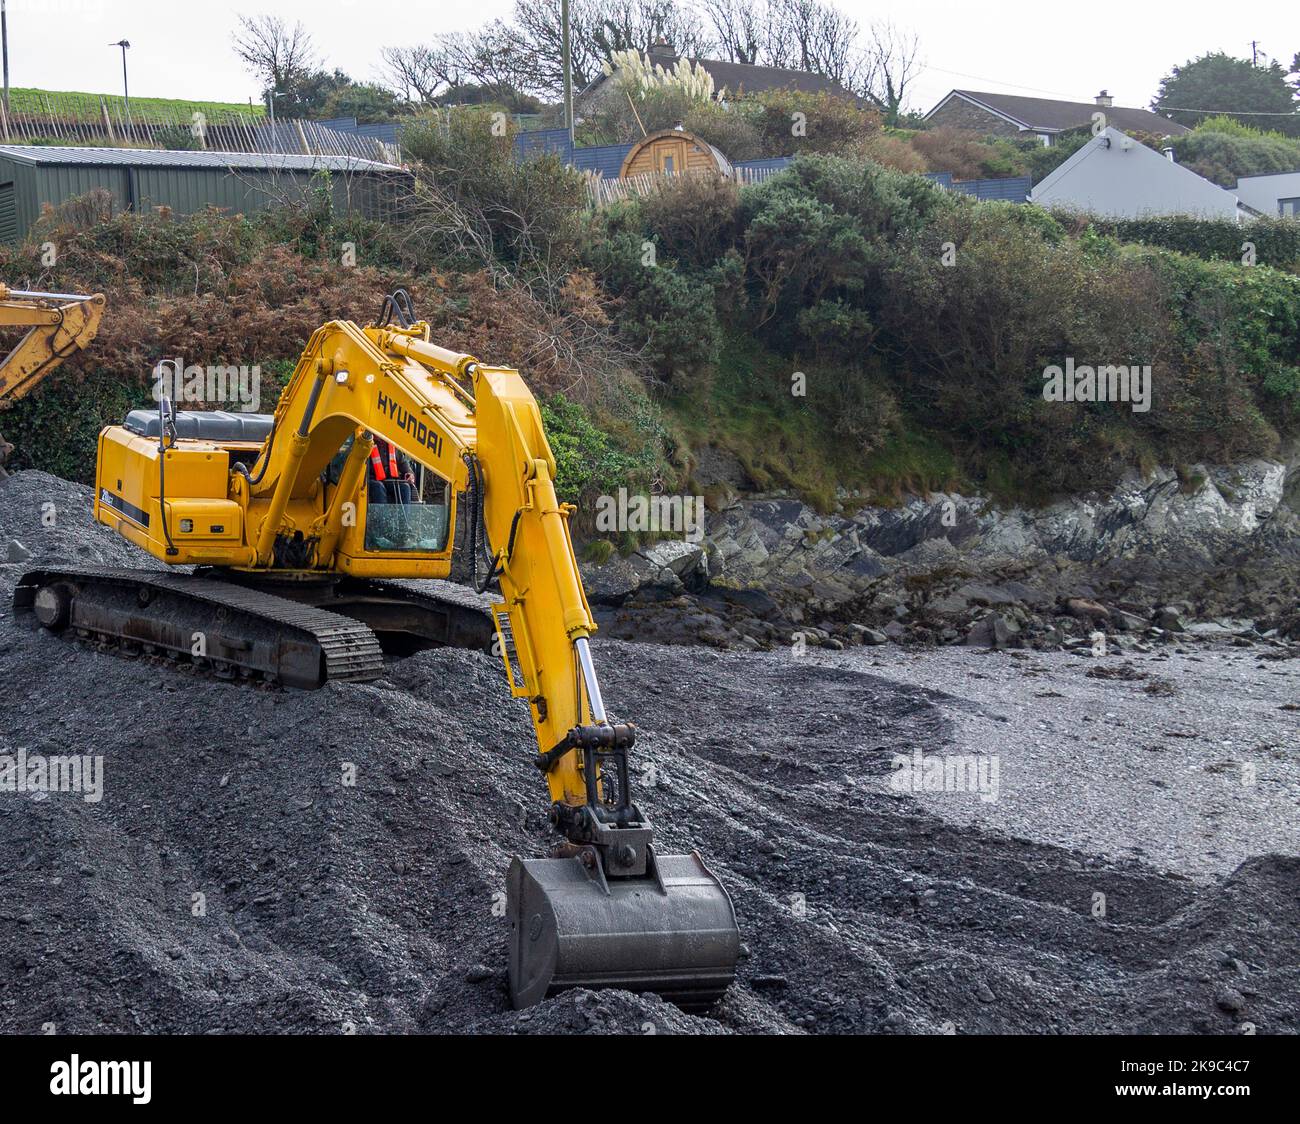 Hyundai 210LC-7 Excavator digging out a channel on the foreshore. Stock Photo